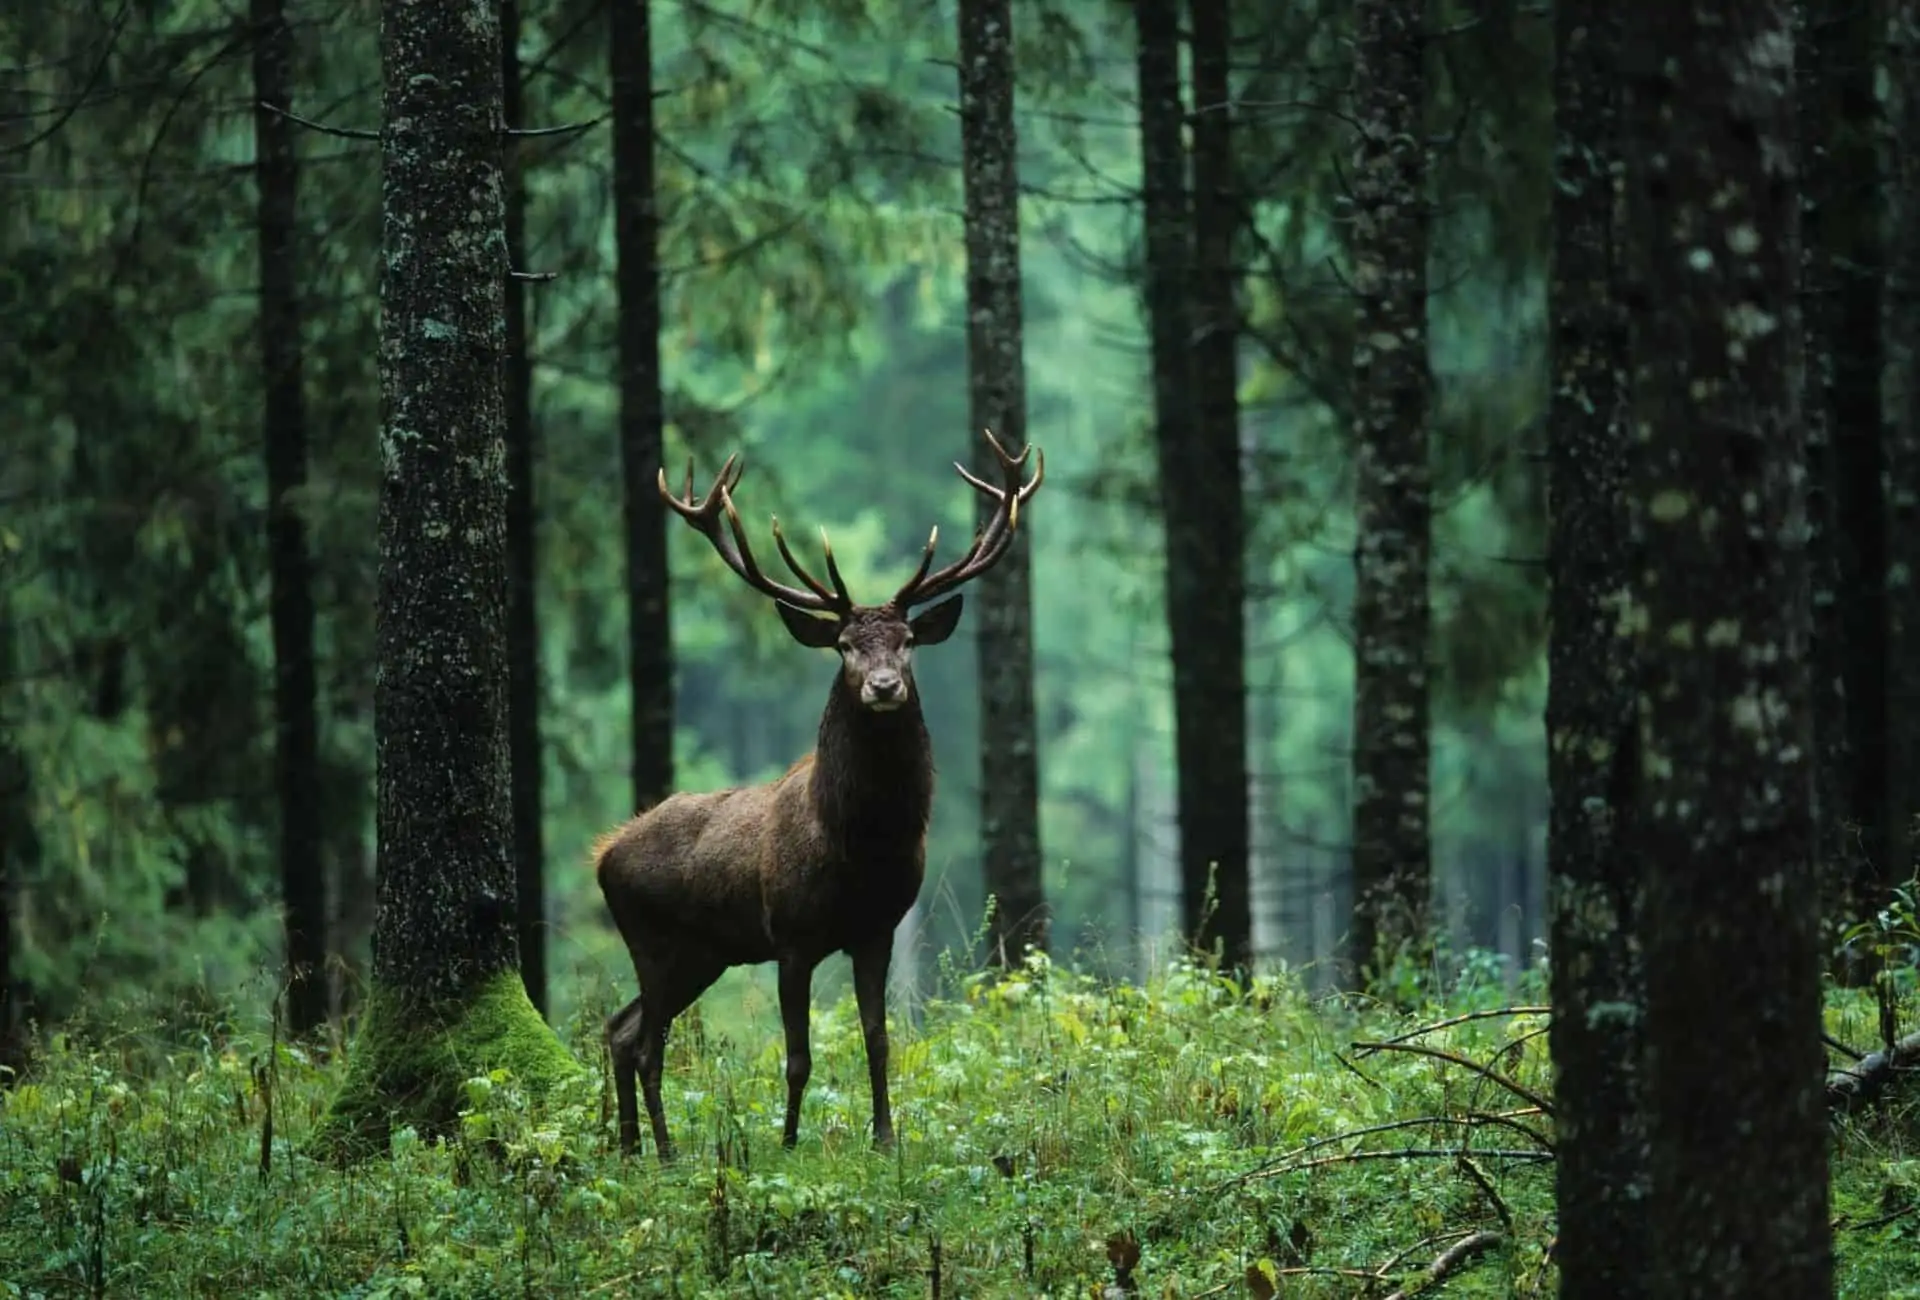 Deer in a green forest.